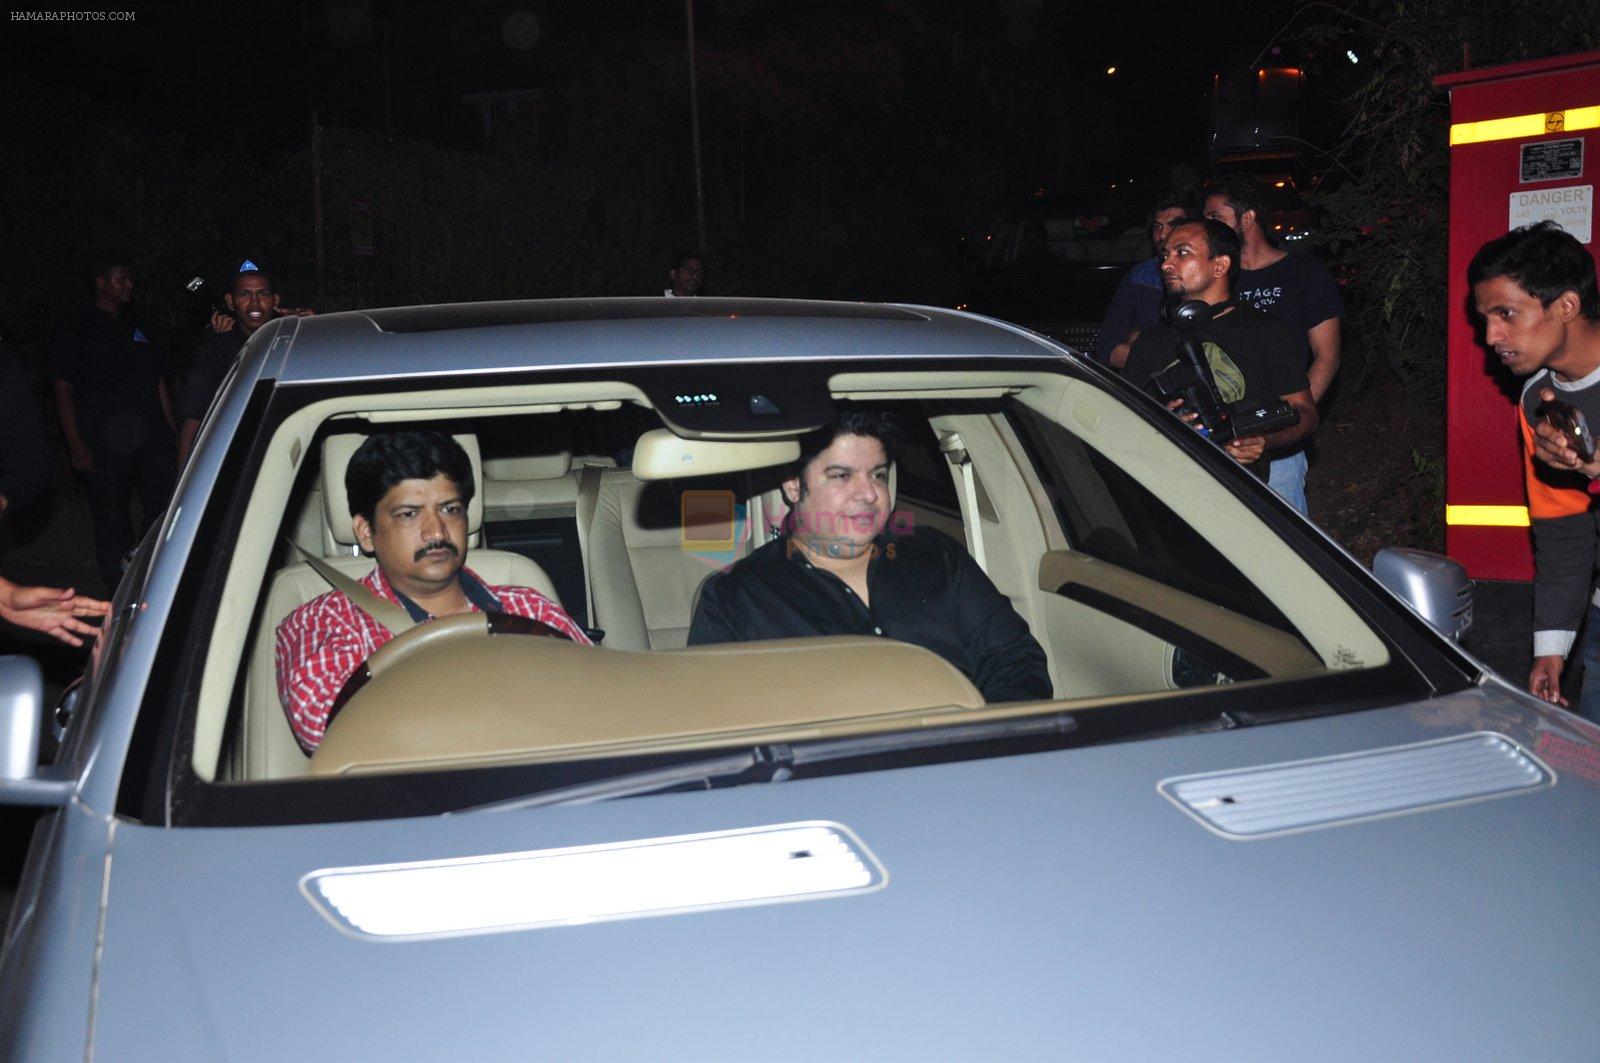 Sajid Khan at SRK bash for Dilwale at his home on 18th Dec 2015